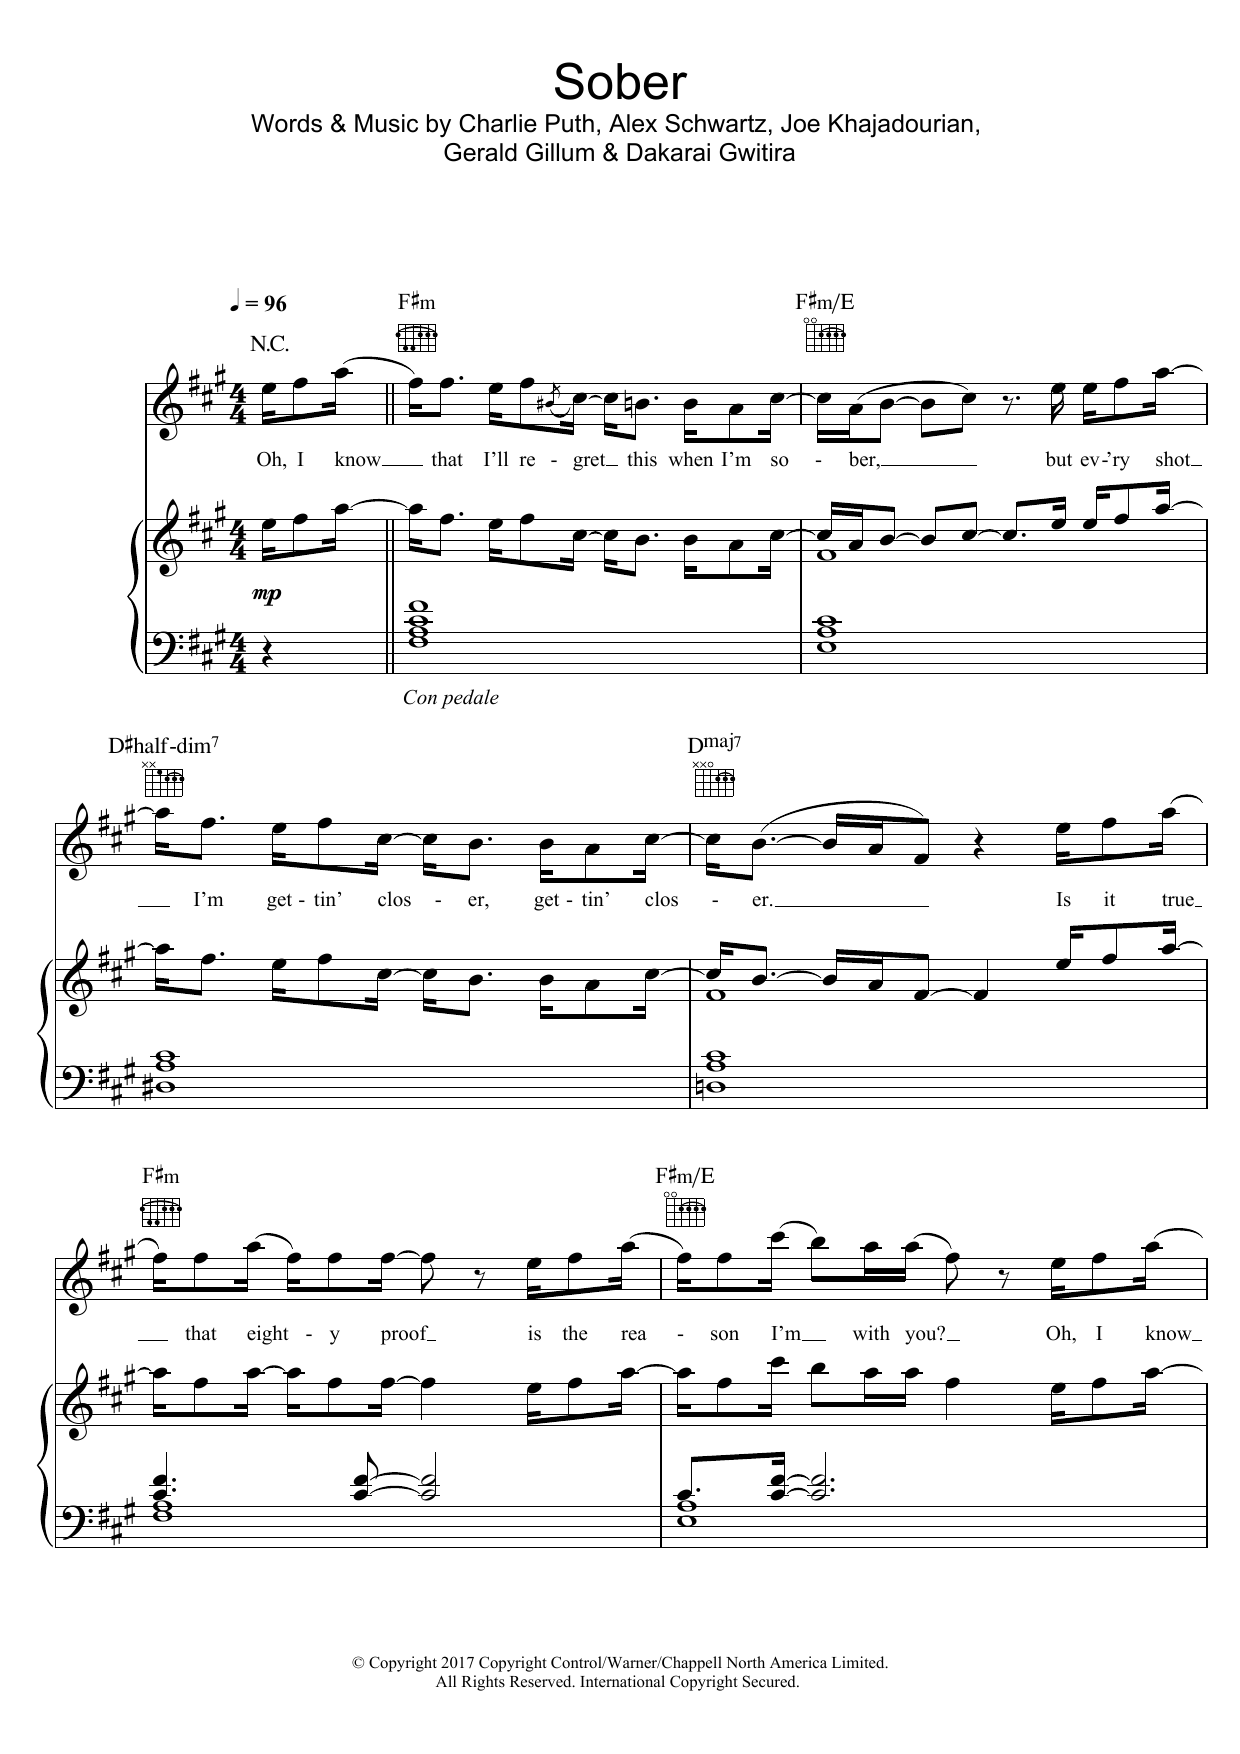 Download G-Eazy Sober (feat. Charlie Puth) Sheet Music